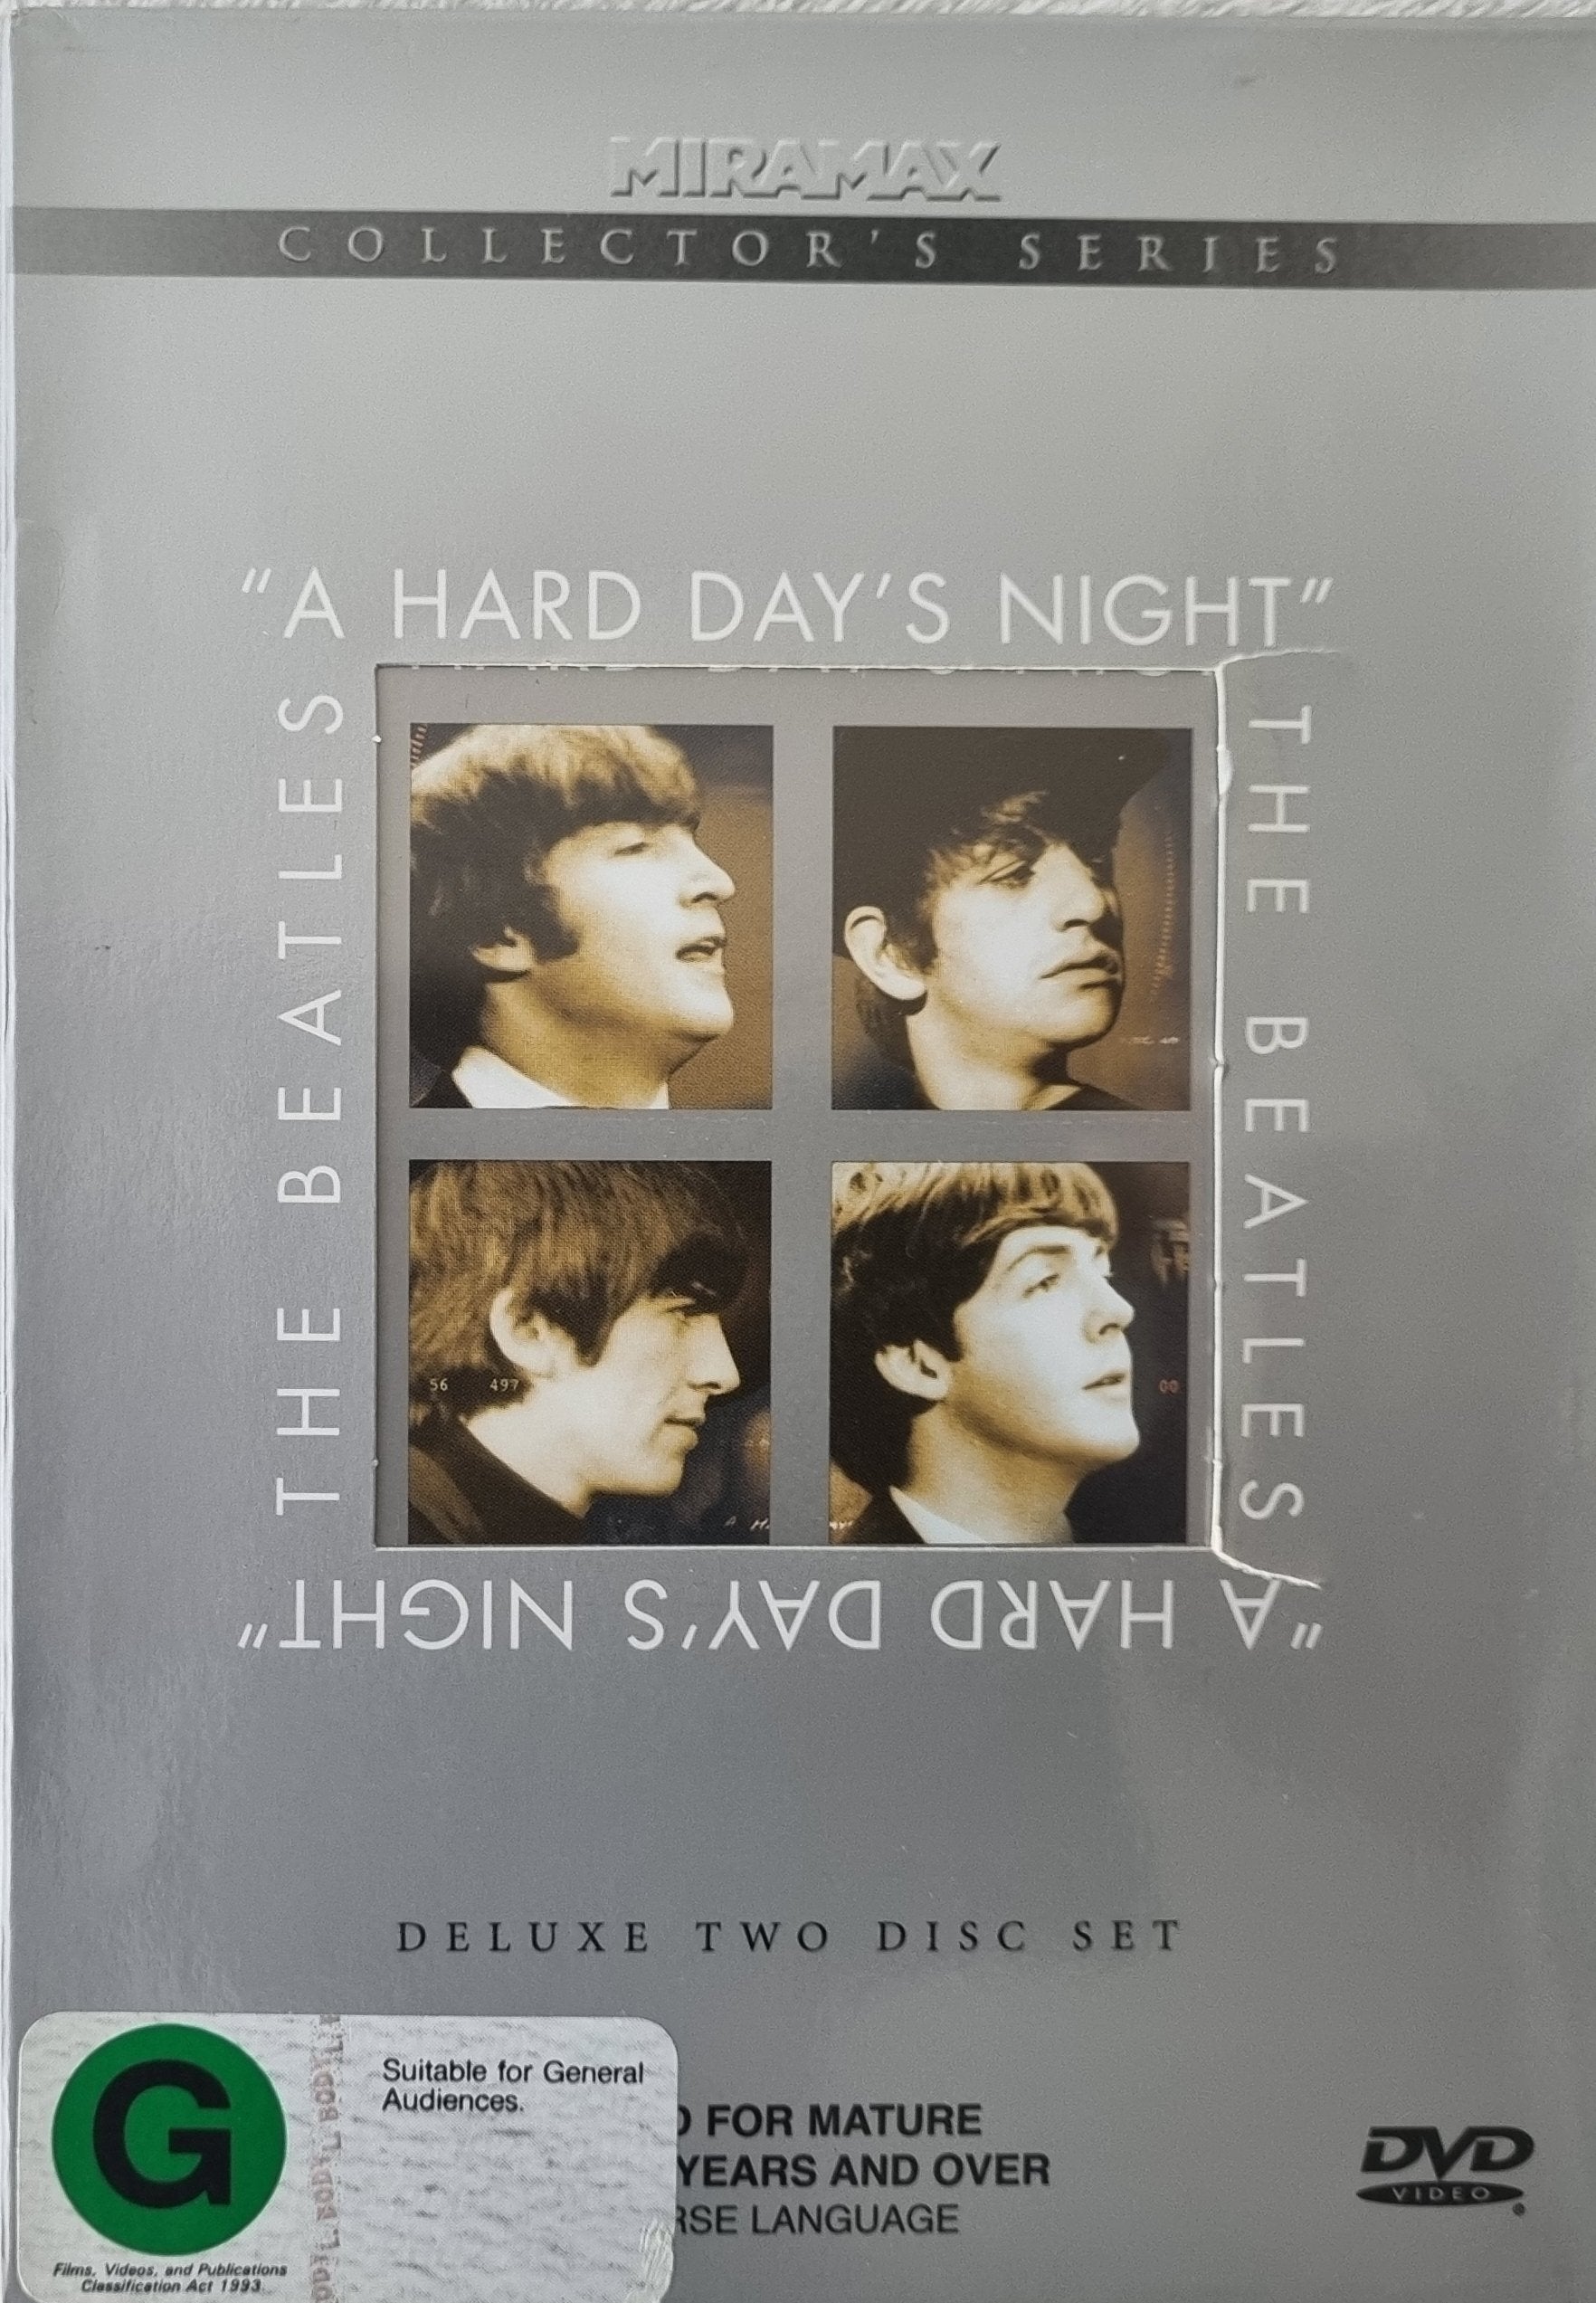 The Beatles - A Hard Day's Night - Deluxe 2 Disc (DVD)